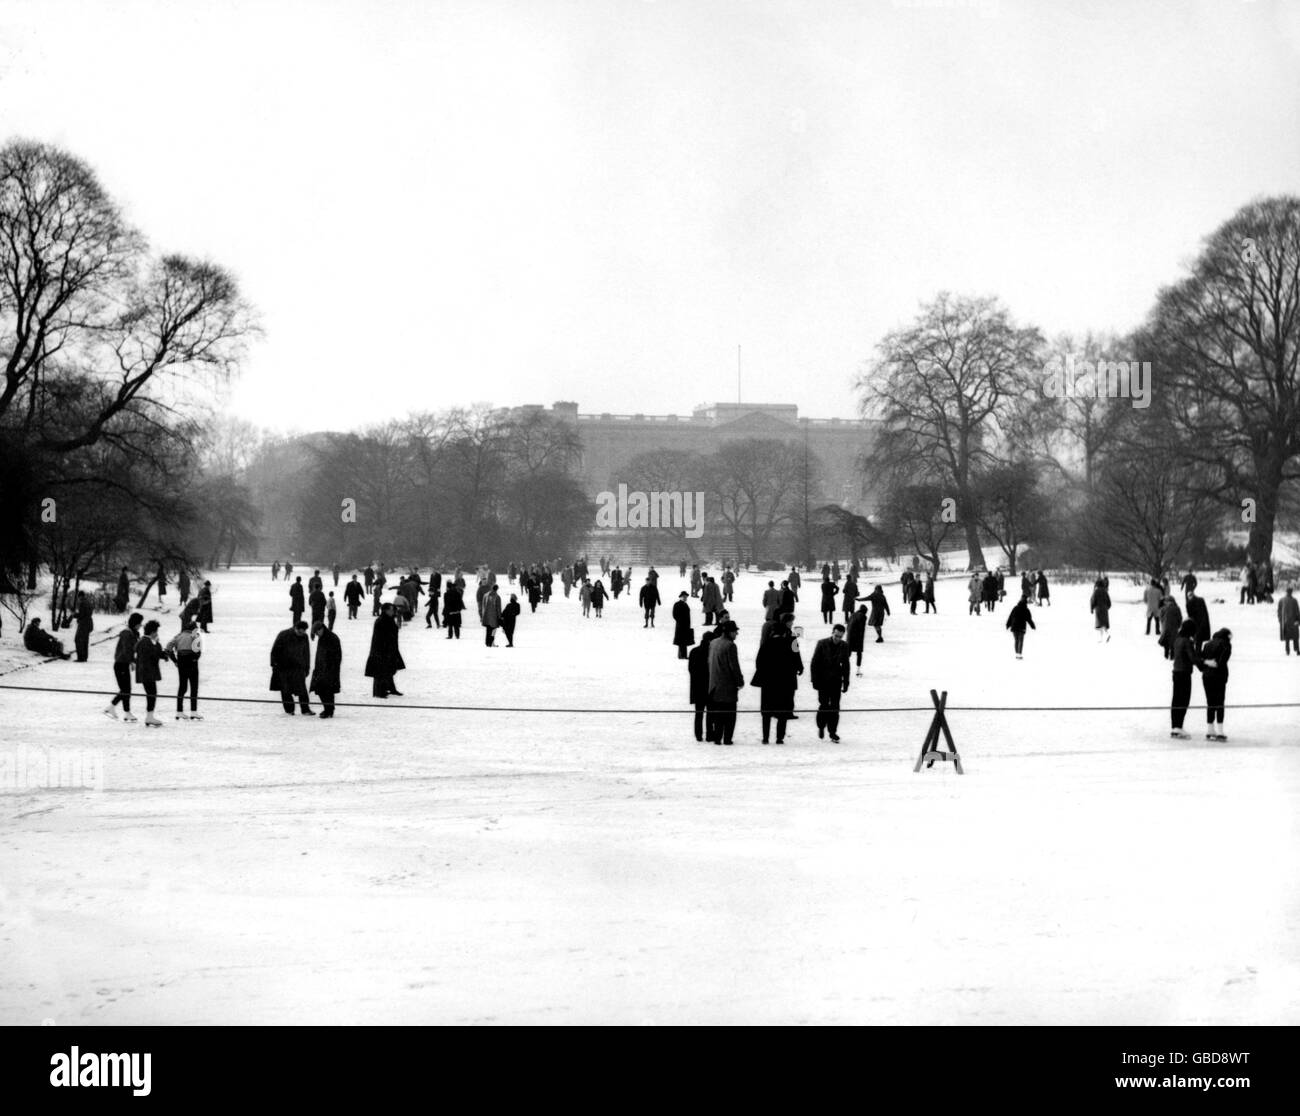 In the shadow of Buckingham palace, skaters and sliders take to the ice of the frozen St. James' Park lake. Stock Photo